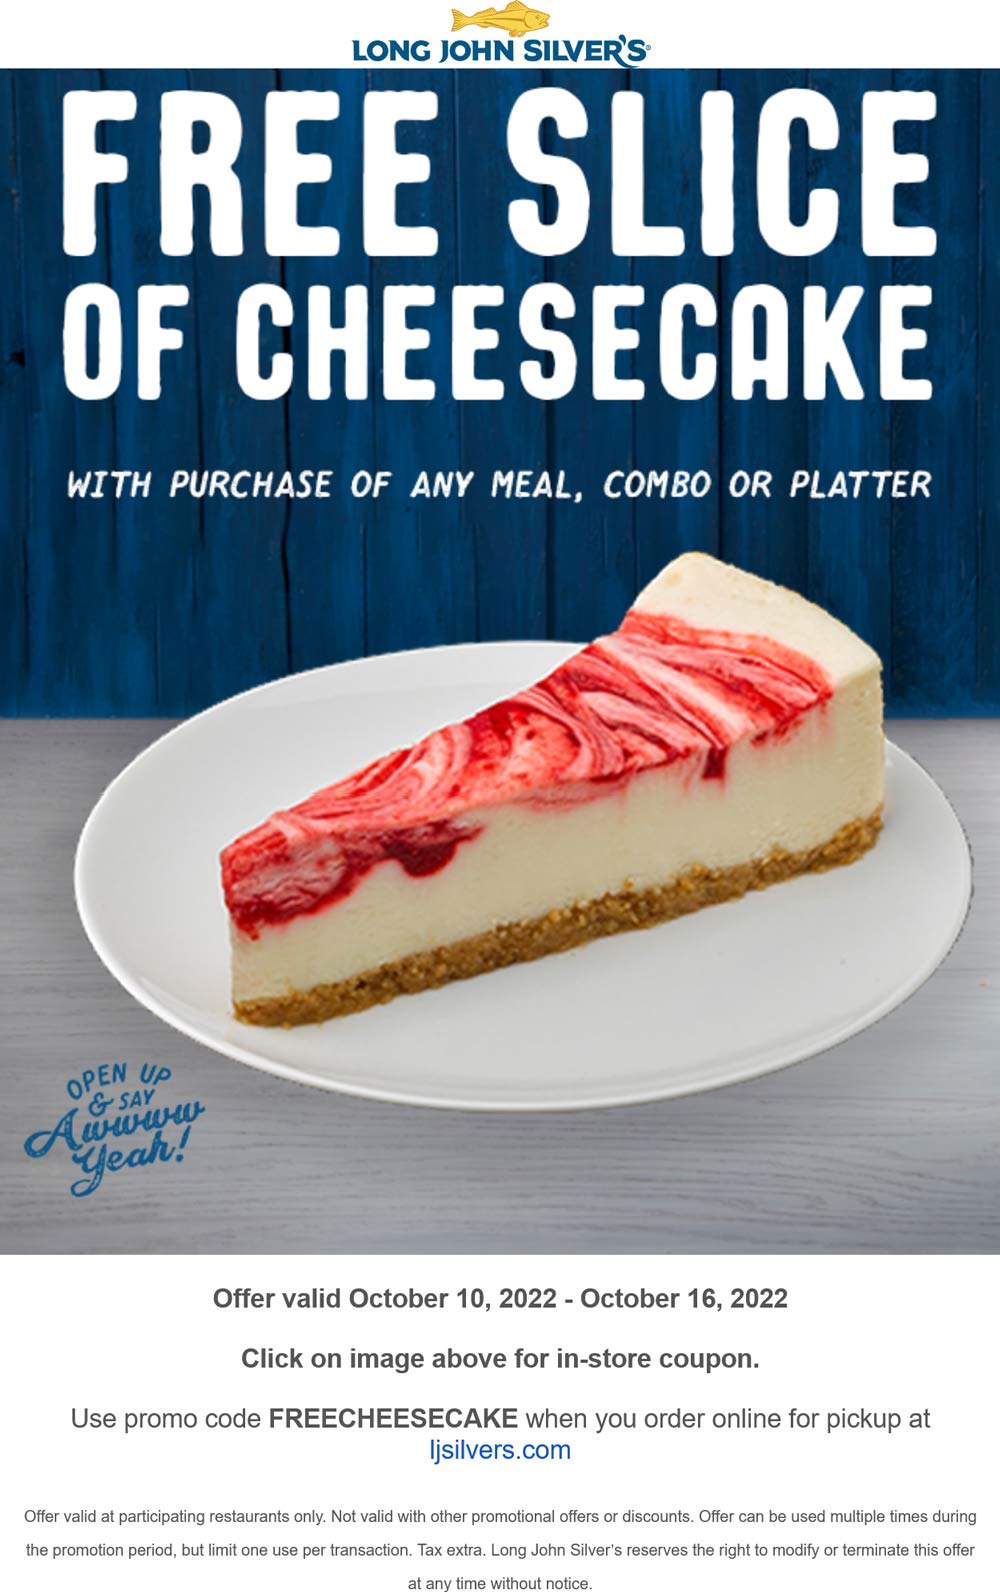 Long John Silvers restaurants Coupon  Free cheesecake with your meal at Long John Silvers via promo code FREECHEESECAKE #longjohnsilvers 